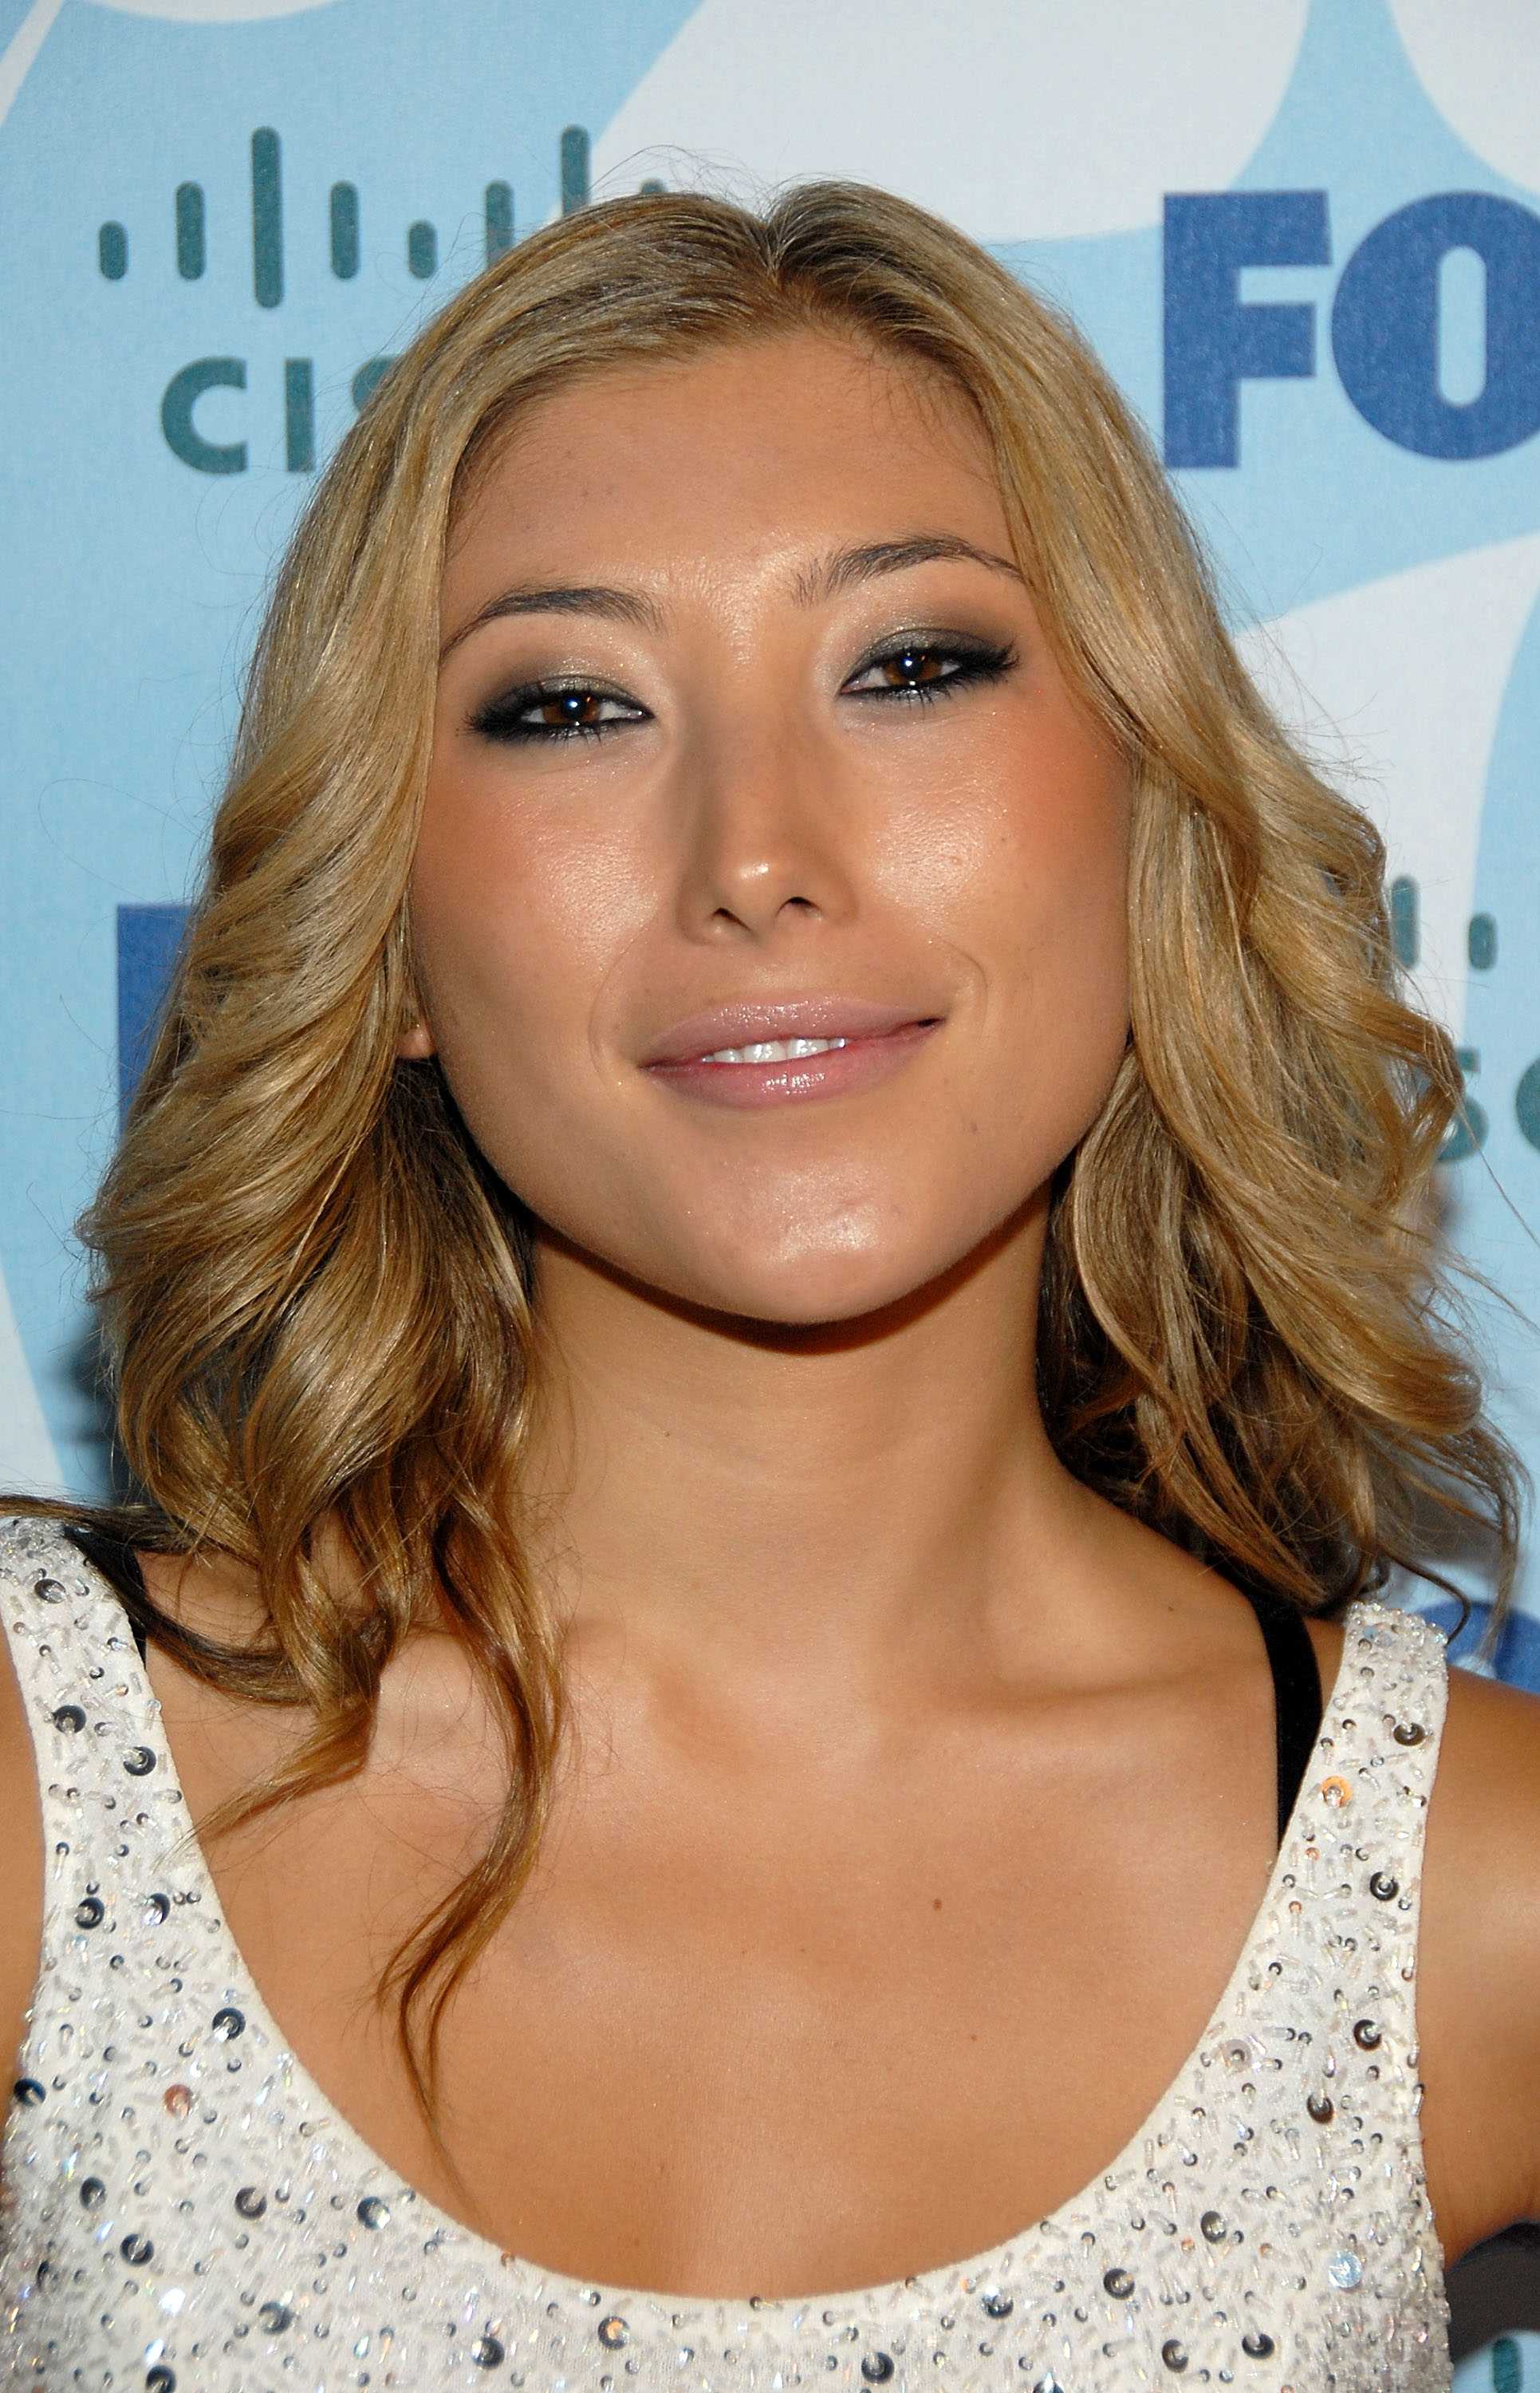 Dichen Lachman portrayed Jiaying in the Agents of S.H.I.E.L.D. episodes The...